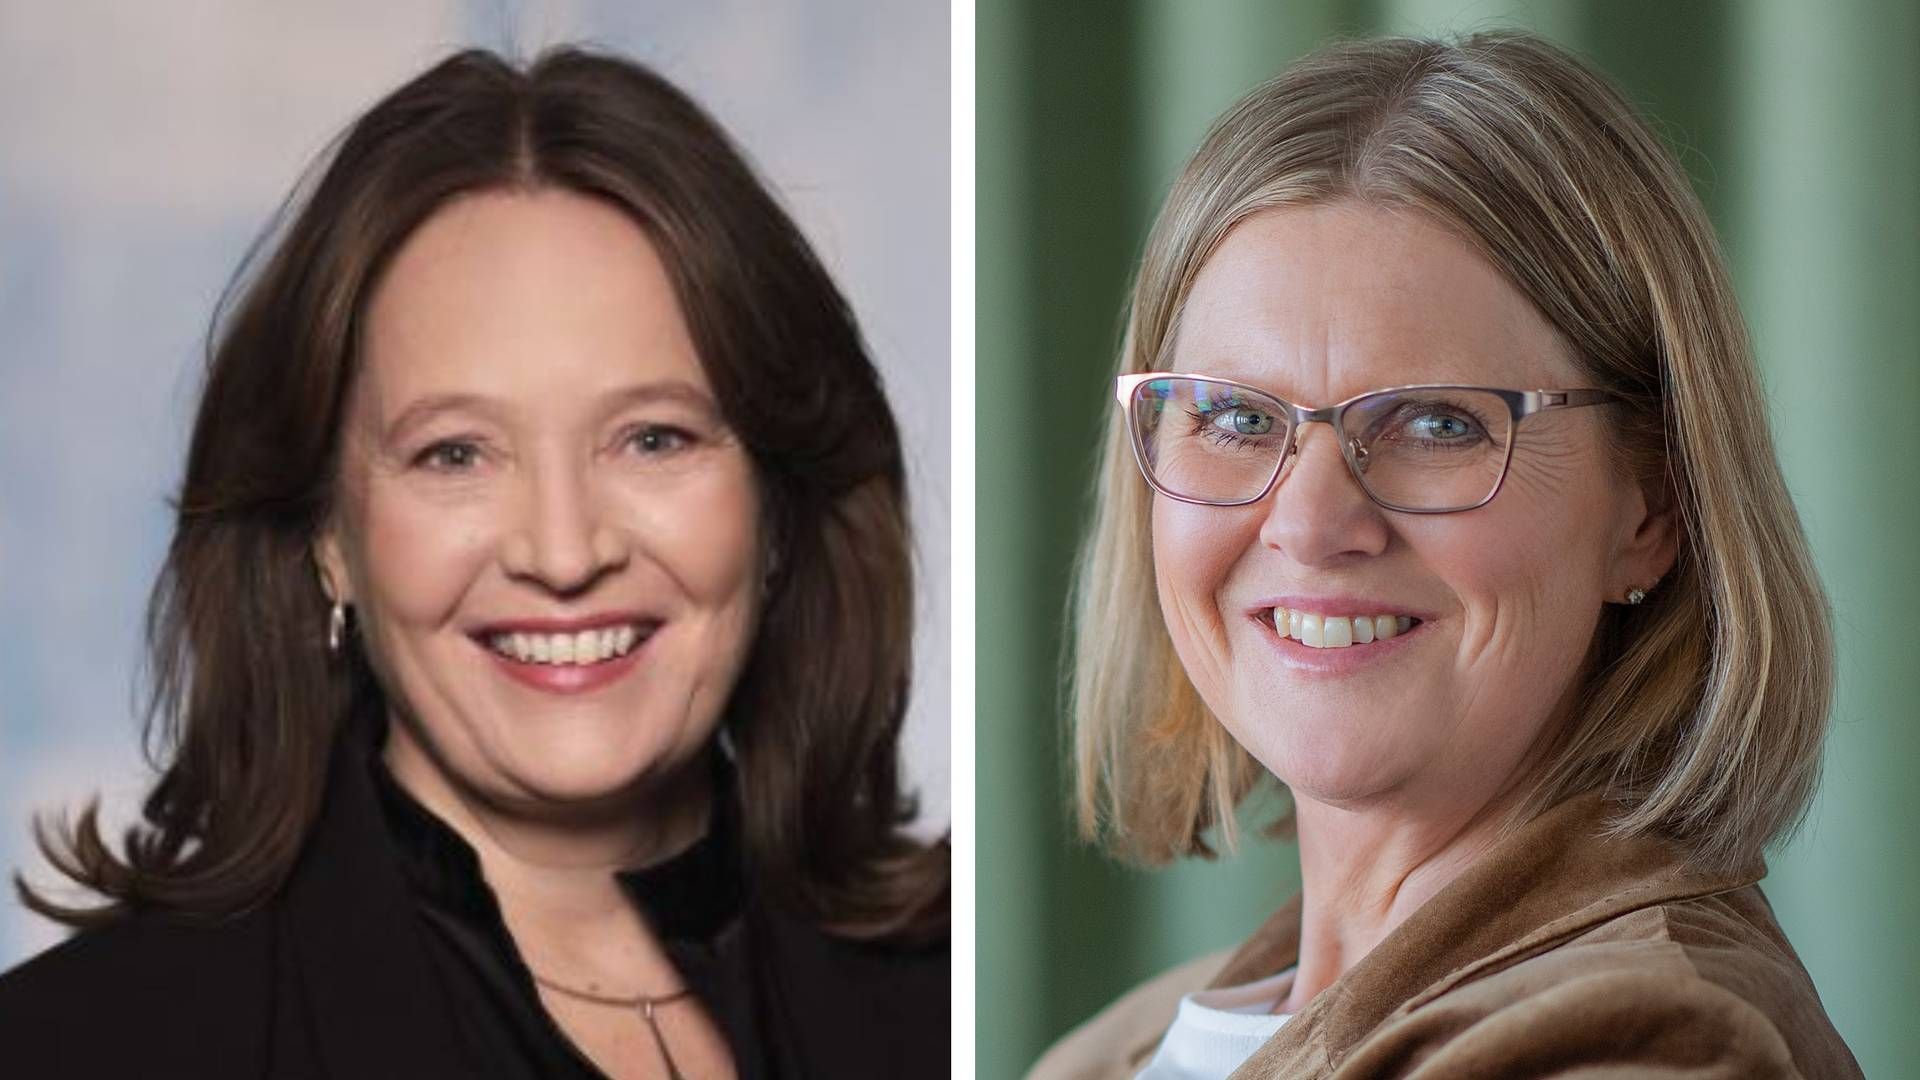 Ylva Wessén (left) is CEO and president of the Folksam Group, while Camilla Larsson is CEO of pension fund KPA, which is part of the Folksam Group. | Photo: Folksam / KPA / PR